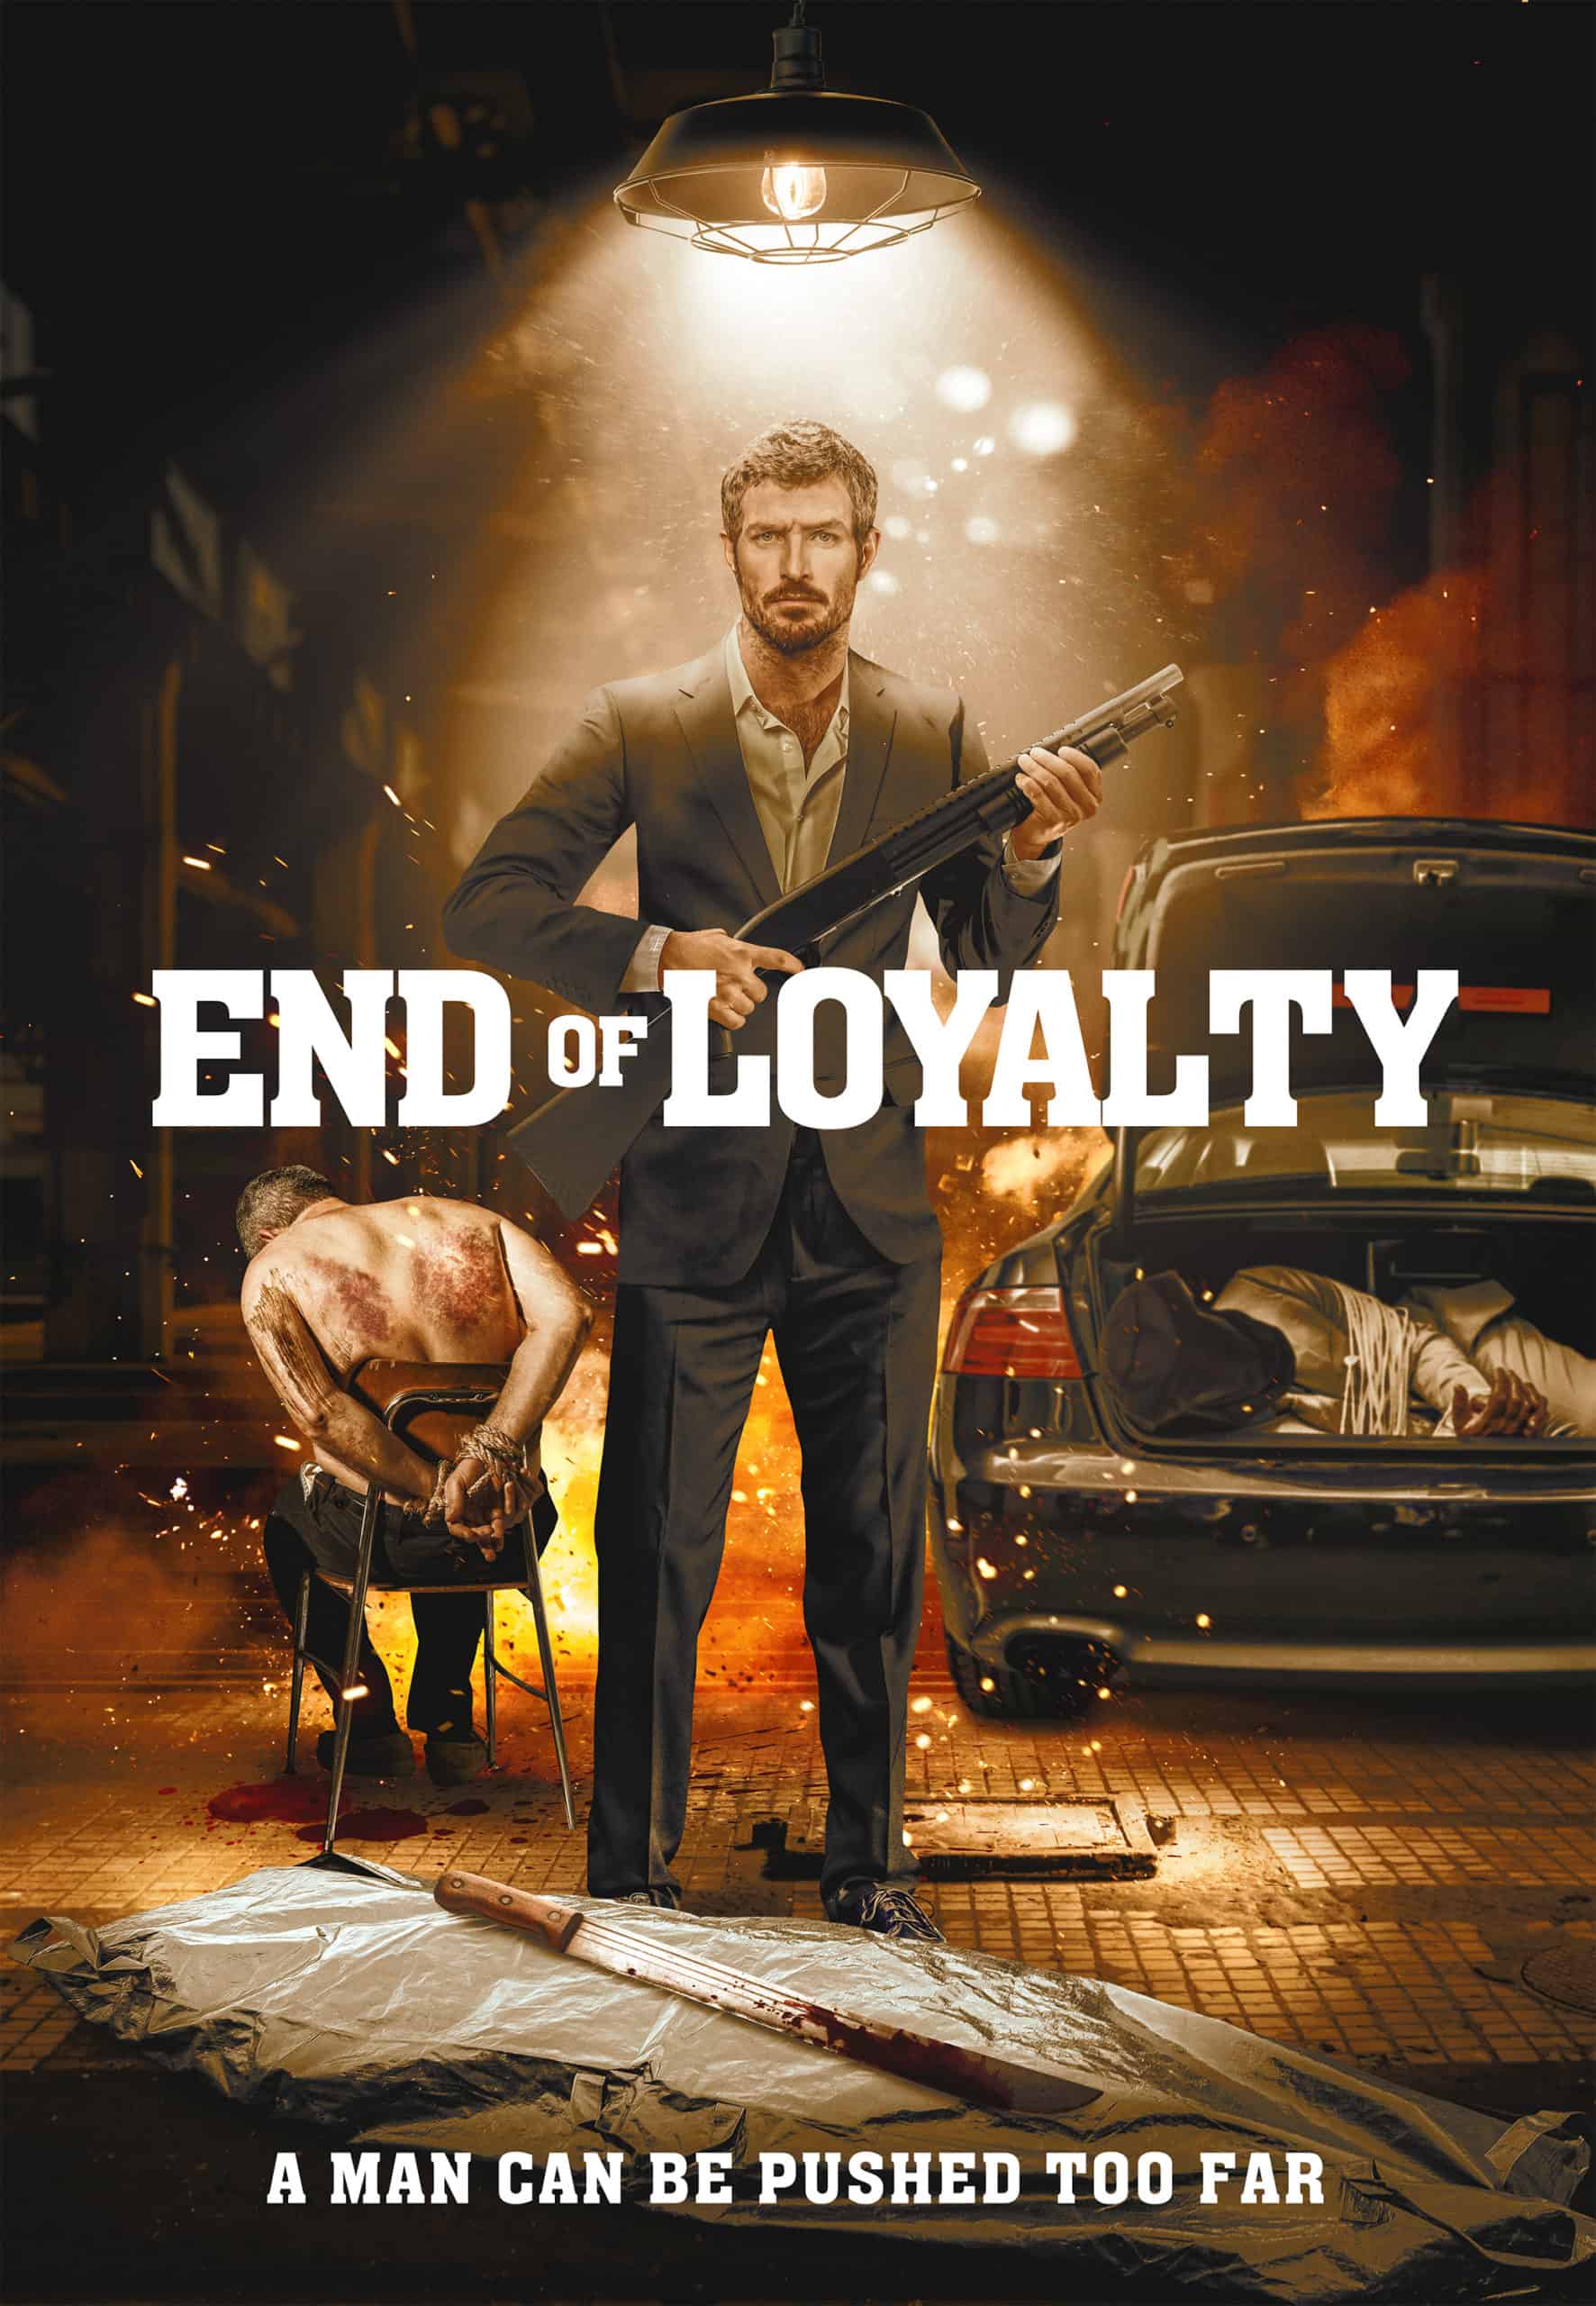 End of Loyalty comes to DVD/VOD on March 7th 41